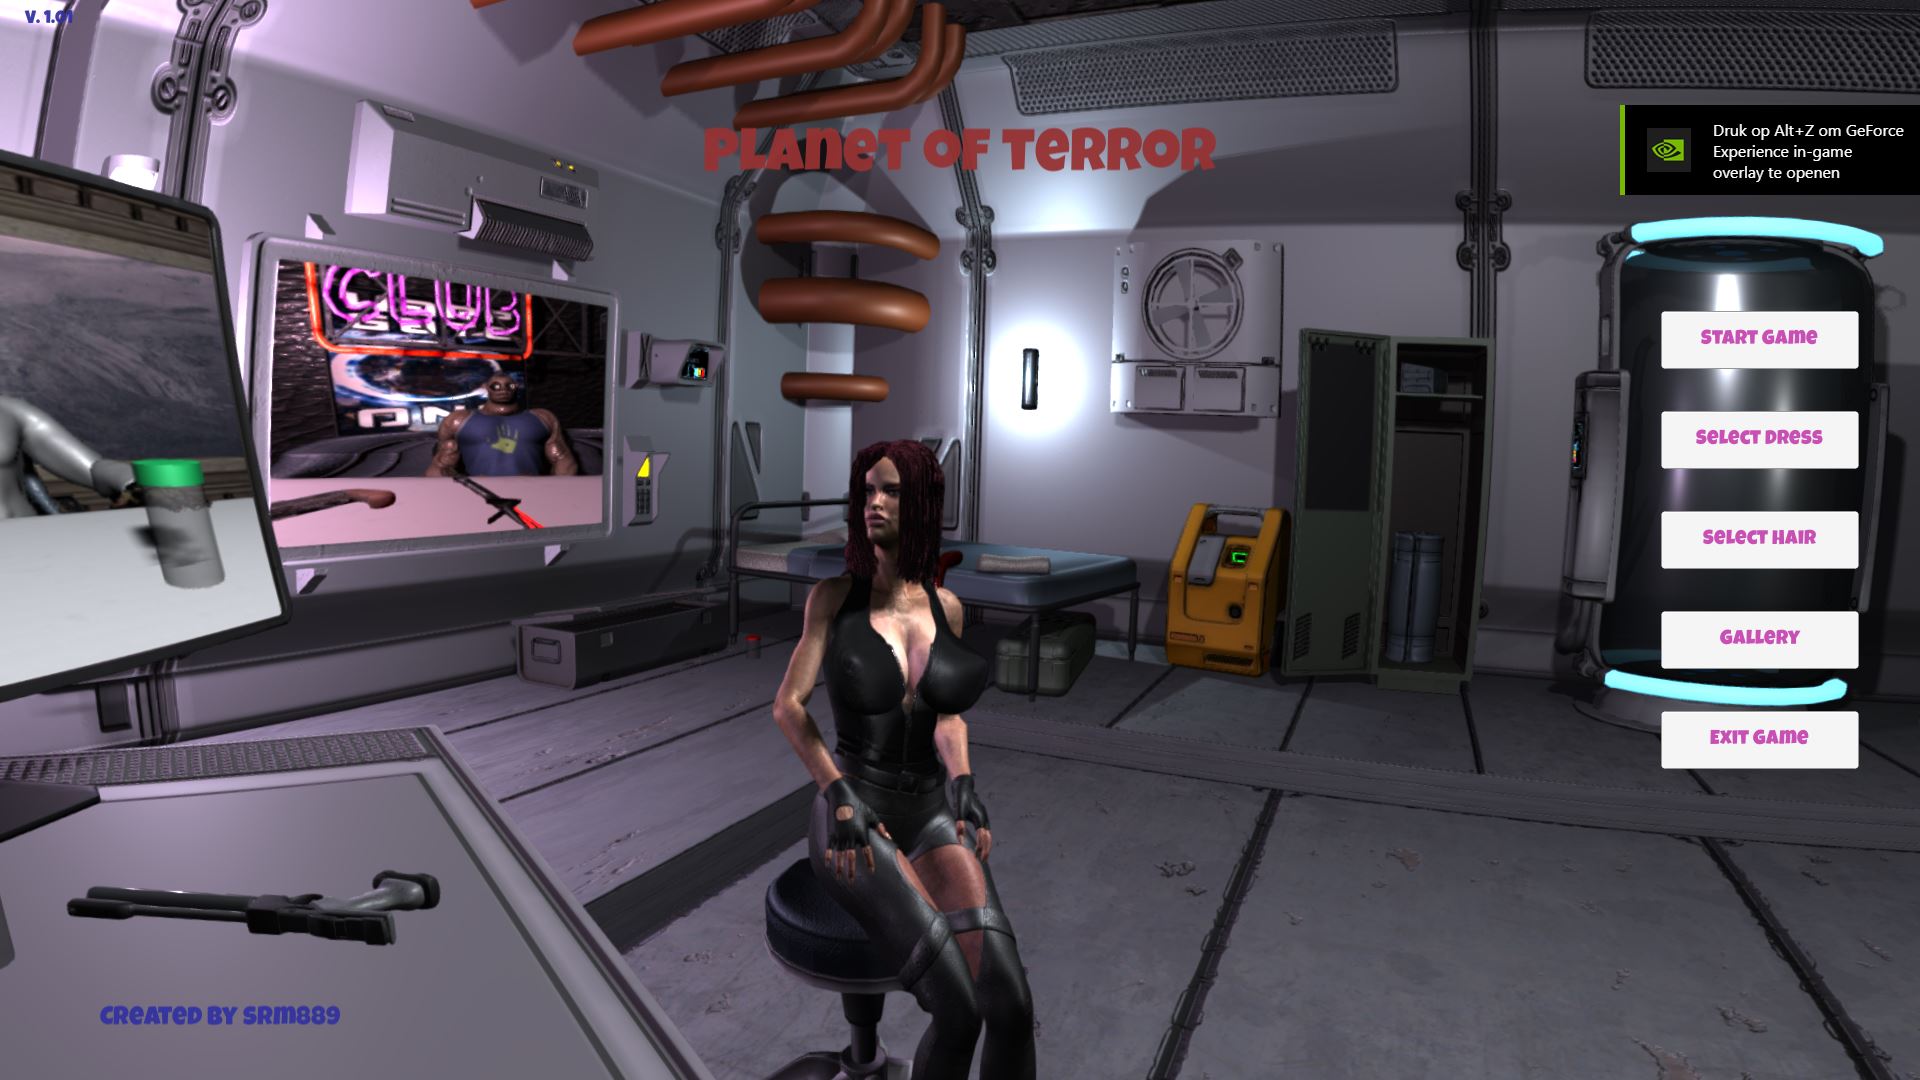 Planet of Terror [Finished] - Version: 1.06